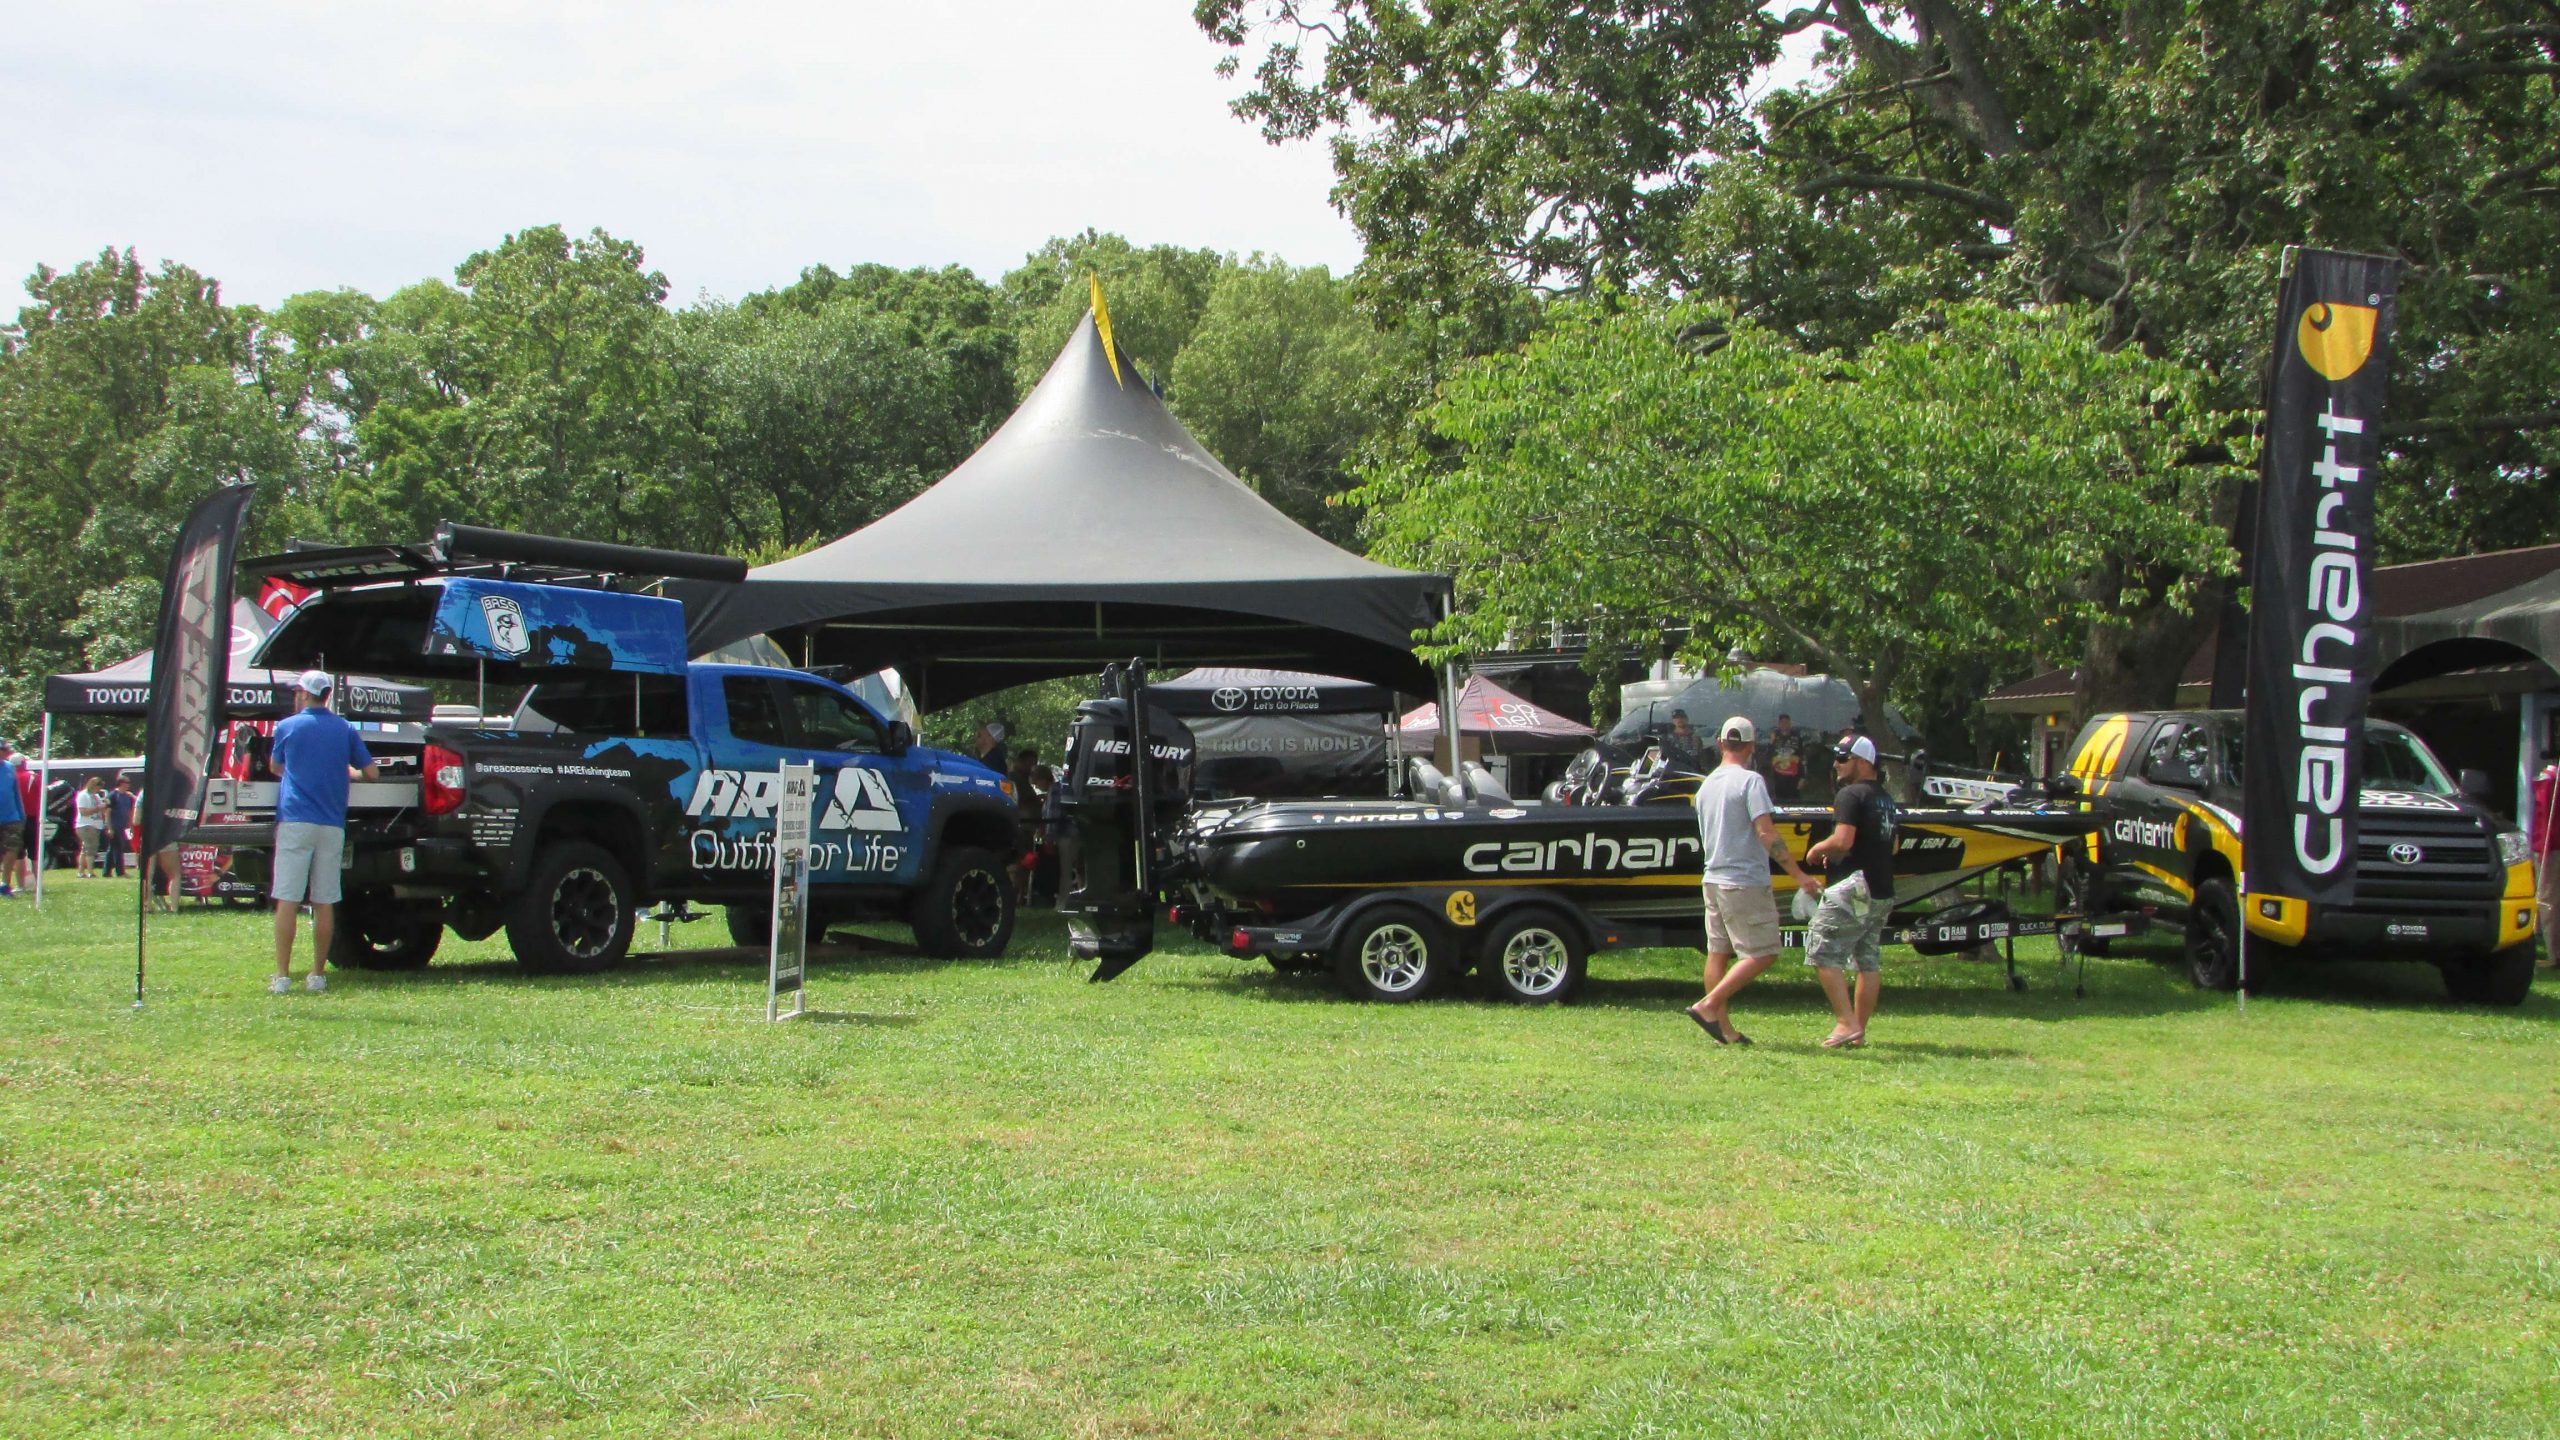 A.R.E. Truck Caps, Toyota and Carhartt were all booth neighbors as part of BASSfest.